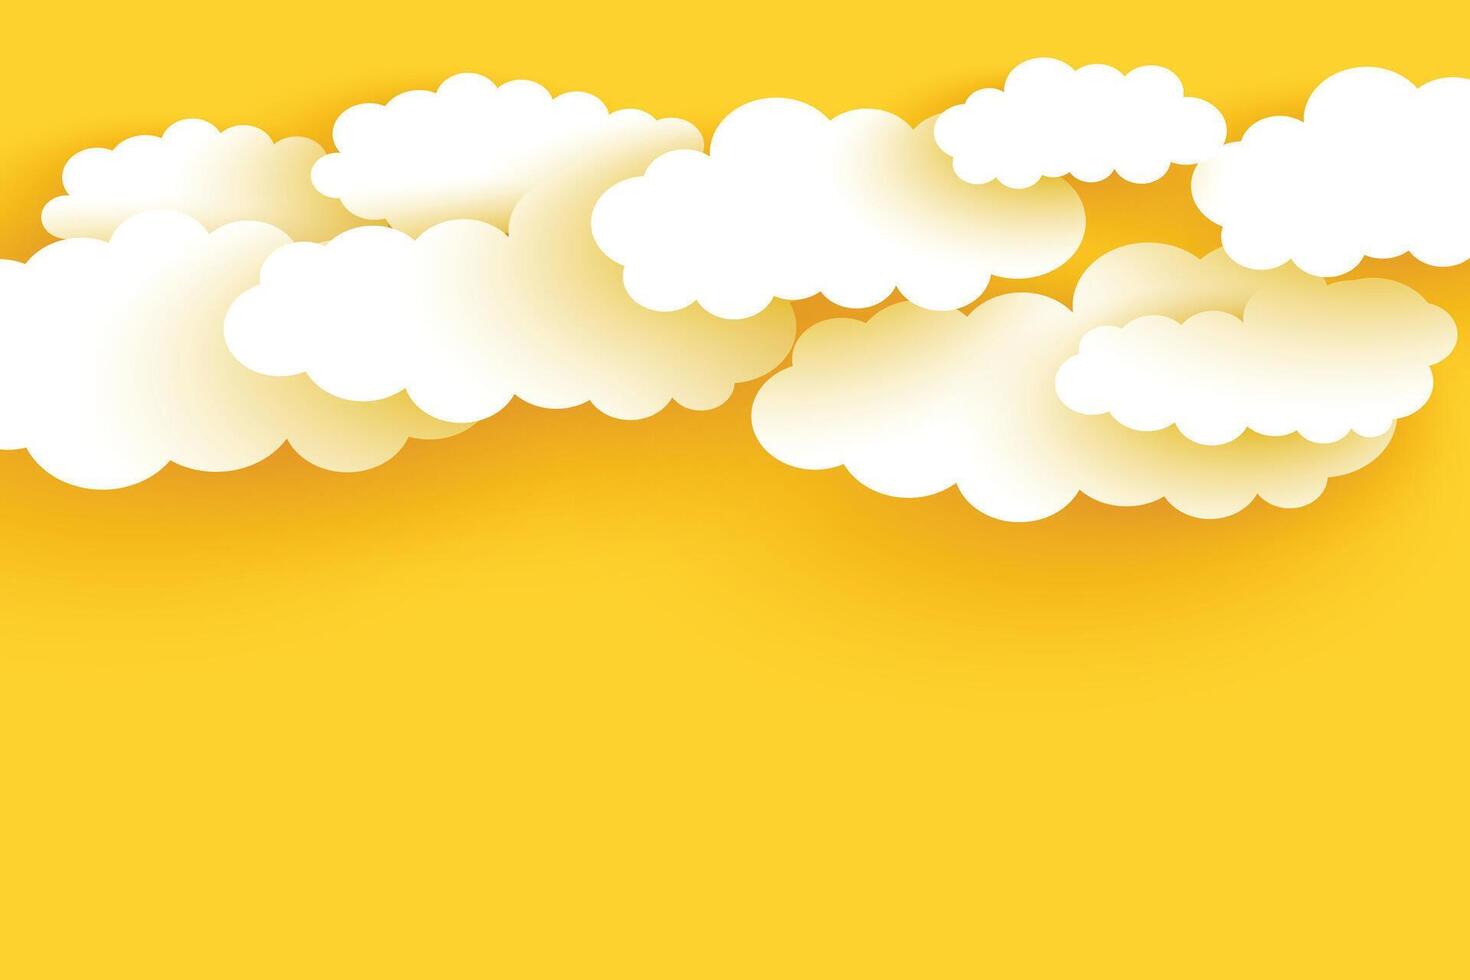 papercut style cloudy yellow background design vector